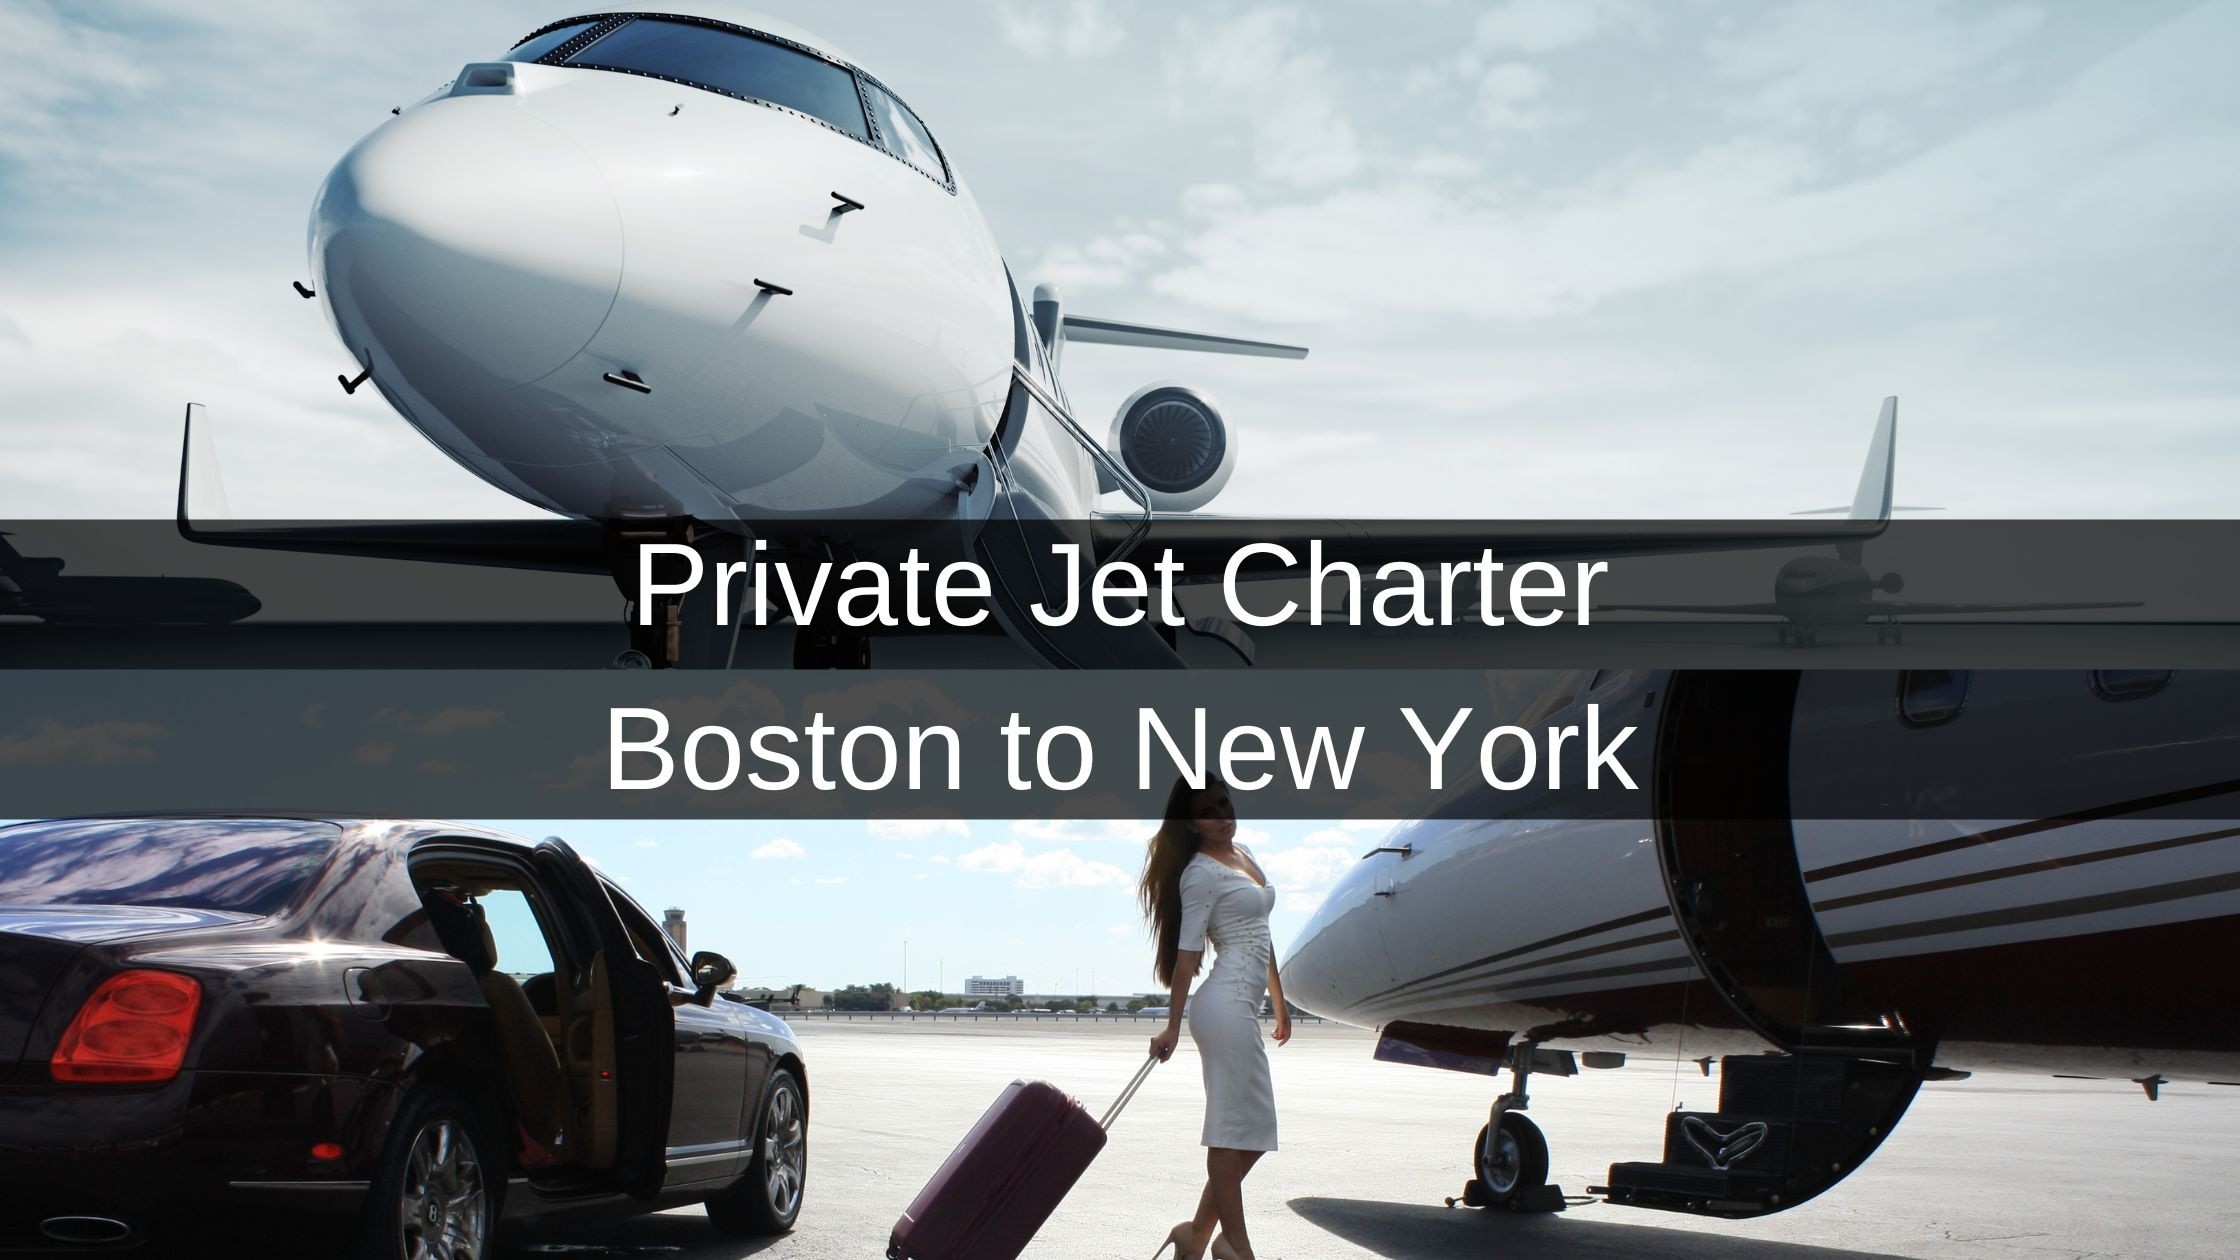 Private Jet Charter from Boston to New York